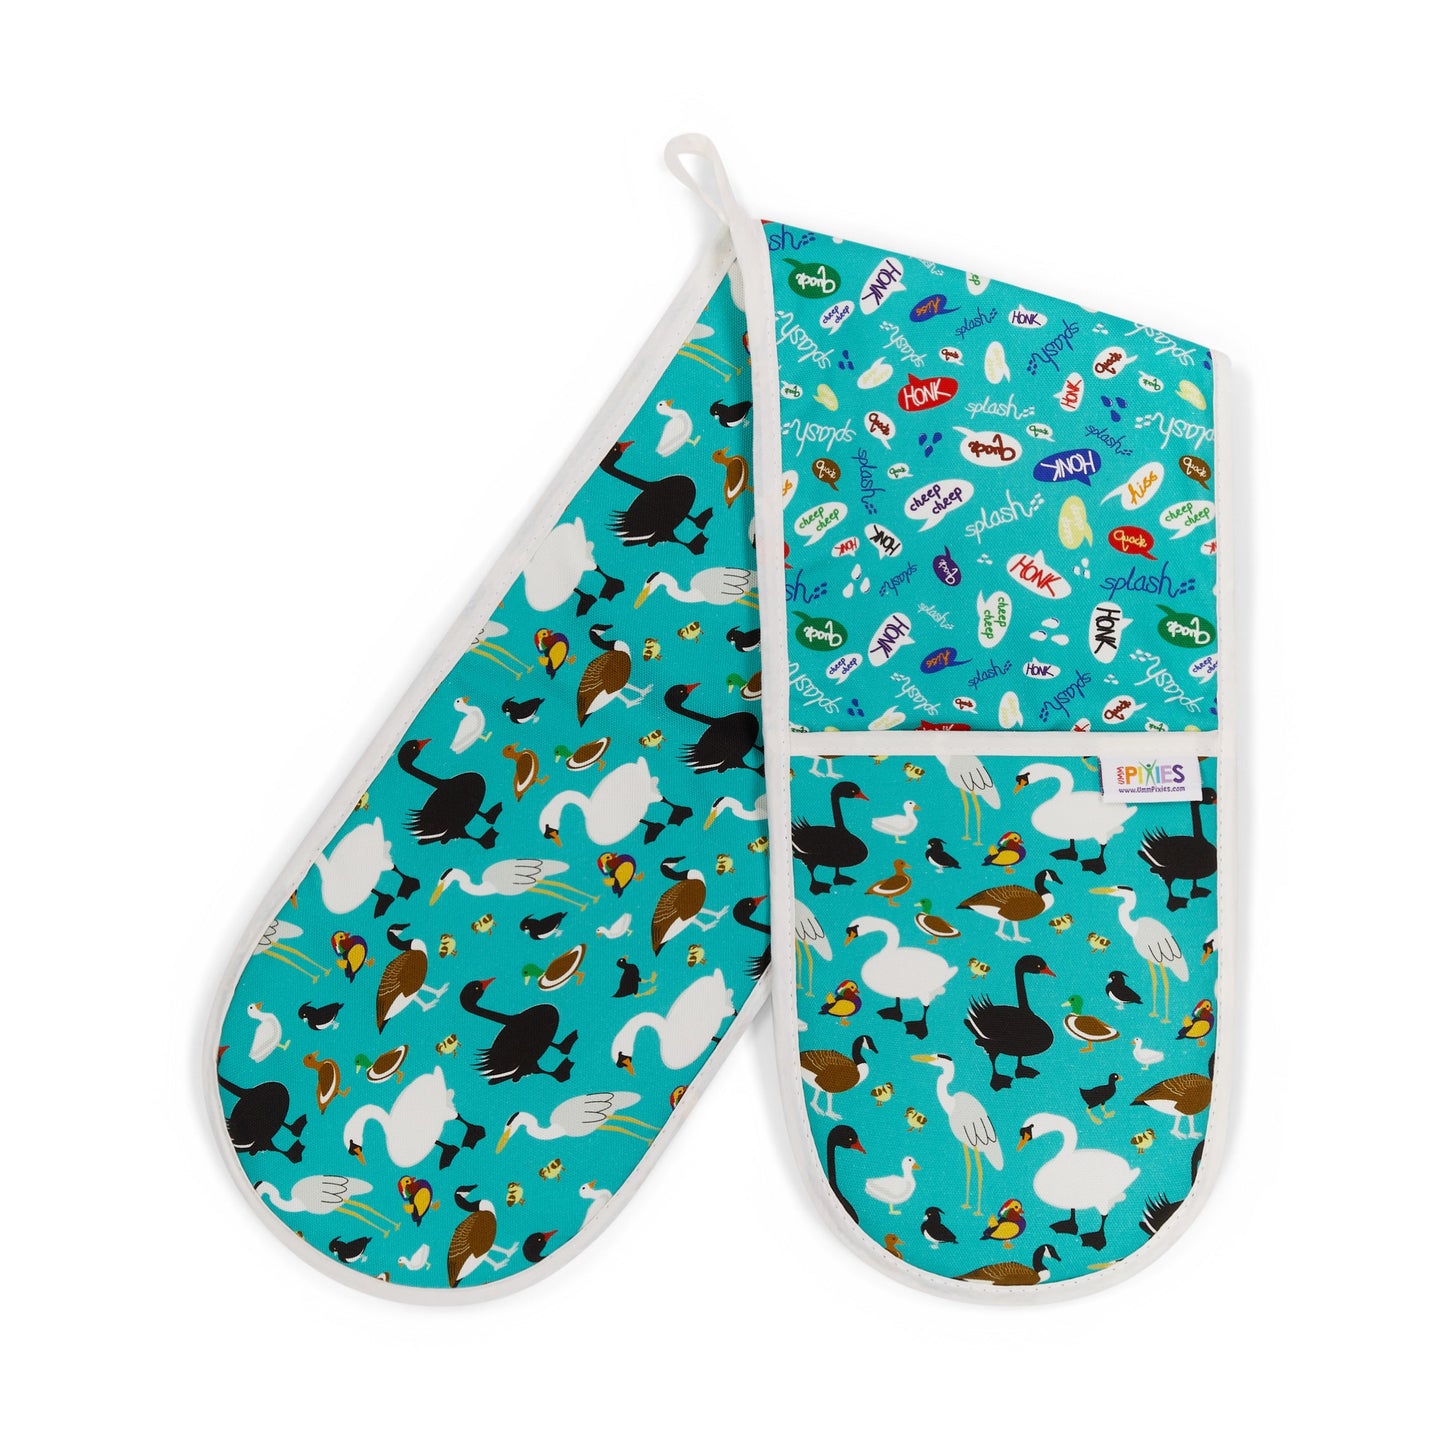 Ducks Oven Gloves in Organic Cotton, designed and made in Brritain 